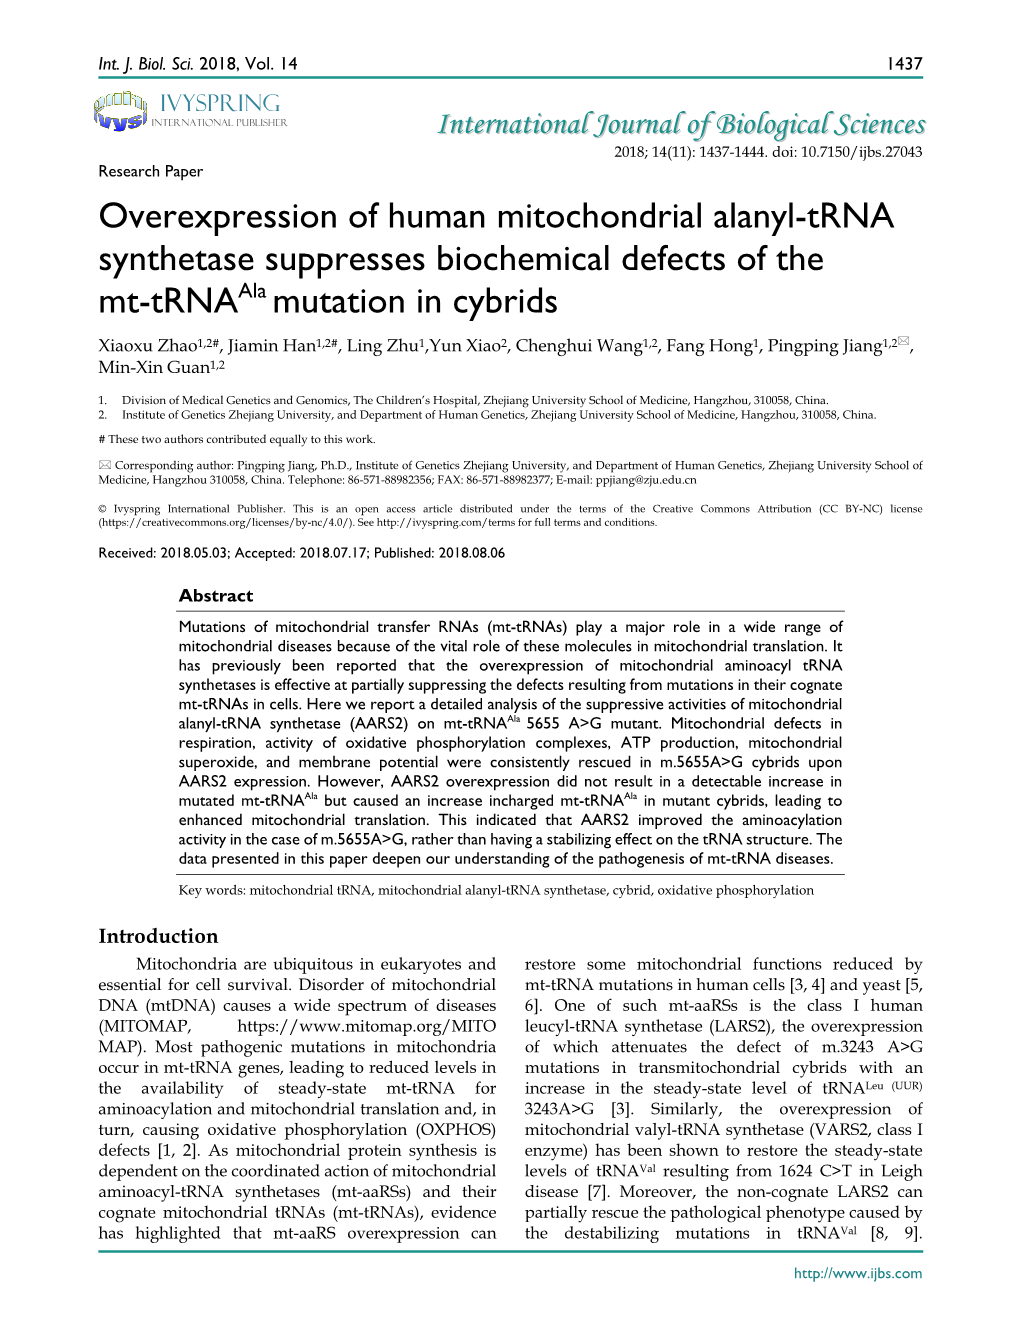 Overexpression of Human Mitochondrial Alanyl-Trna Synthetase Suppresses Biochemical Defects of the Mt-Trnaala Mutation in Cybrid